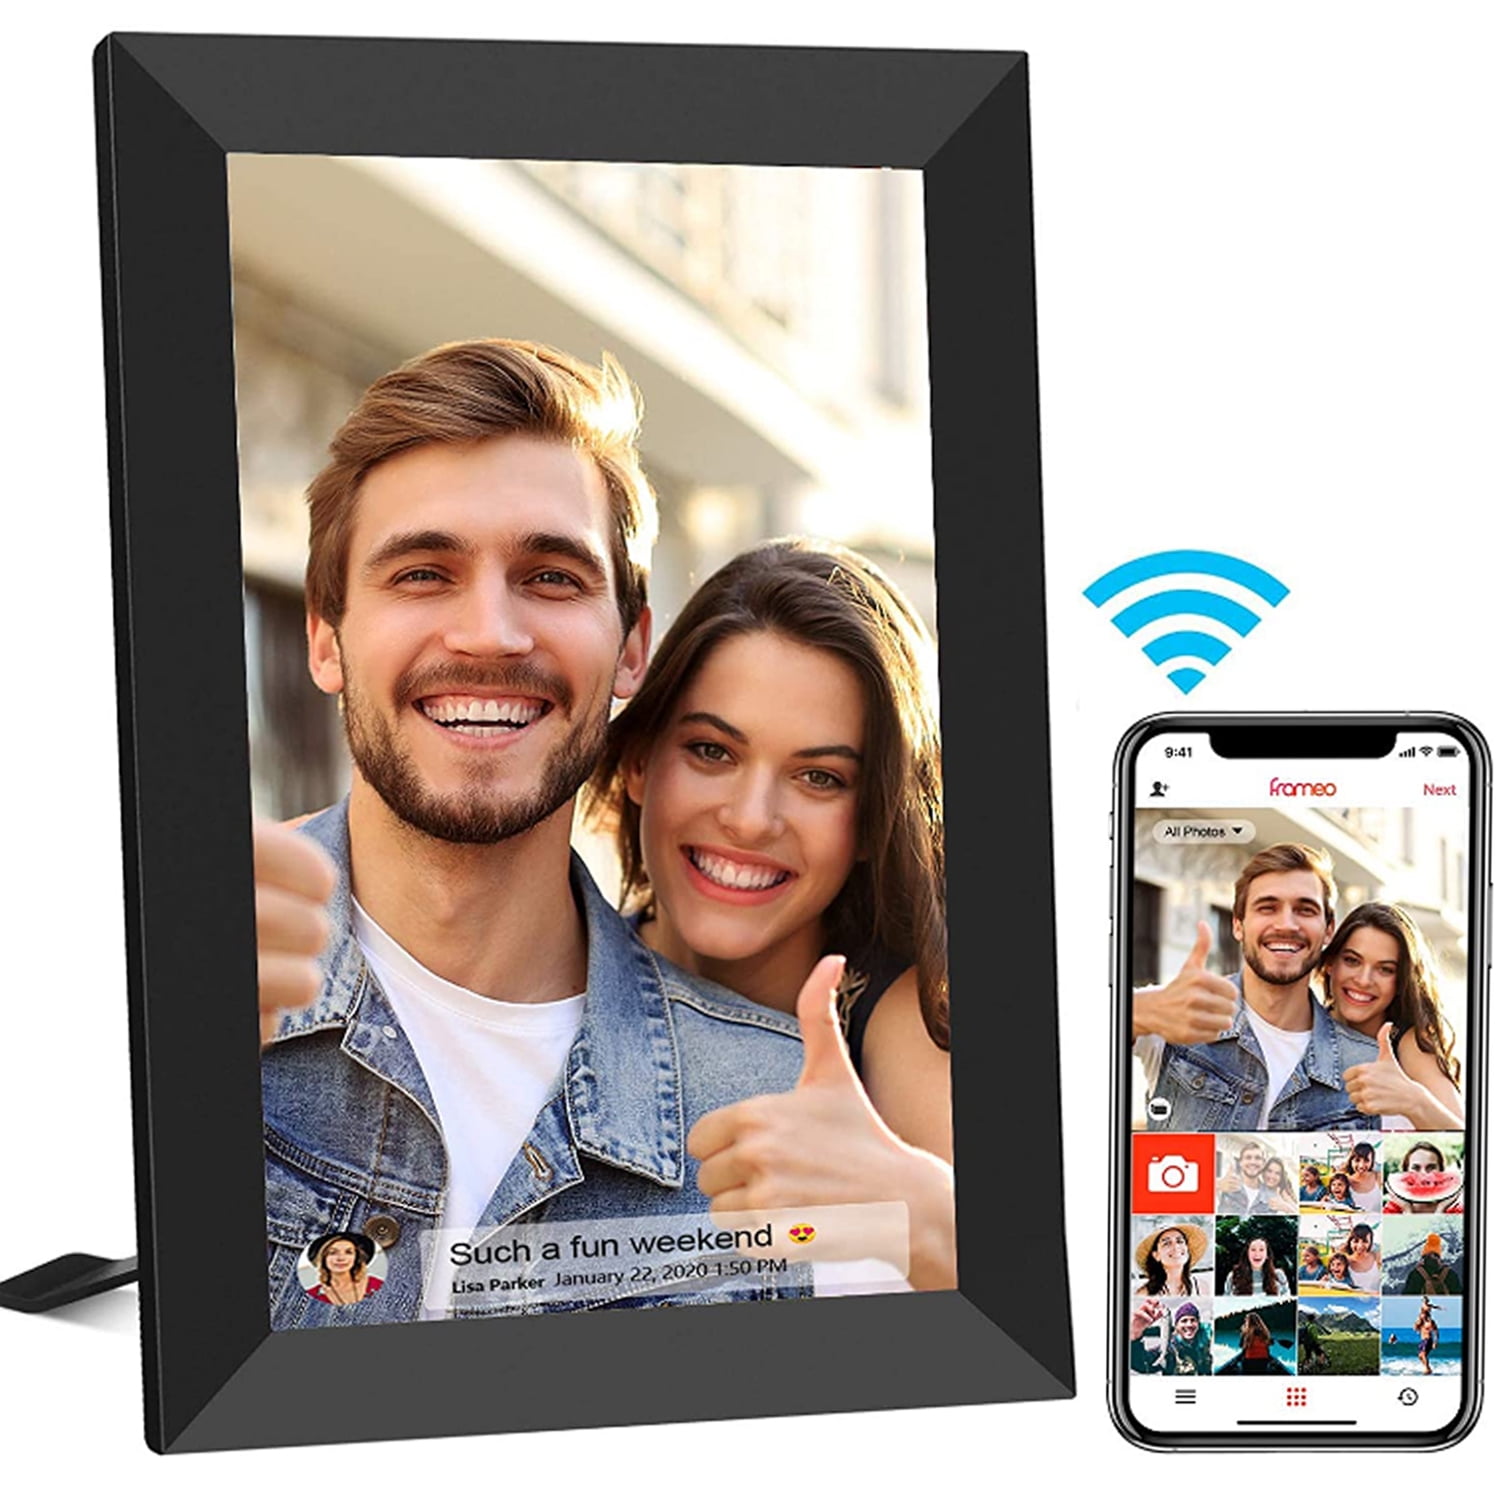 Babyltrl 10.1&quot; Digital Photo Picture Frame with Wifi,HD IPS Touch Screen Smart Photo Frame,16GB Storage Auto-Rotate,Easy to Share Photos Videos via Frameo App,Perfect Gift for Christmas